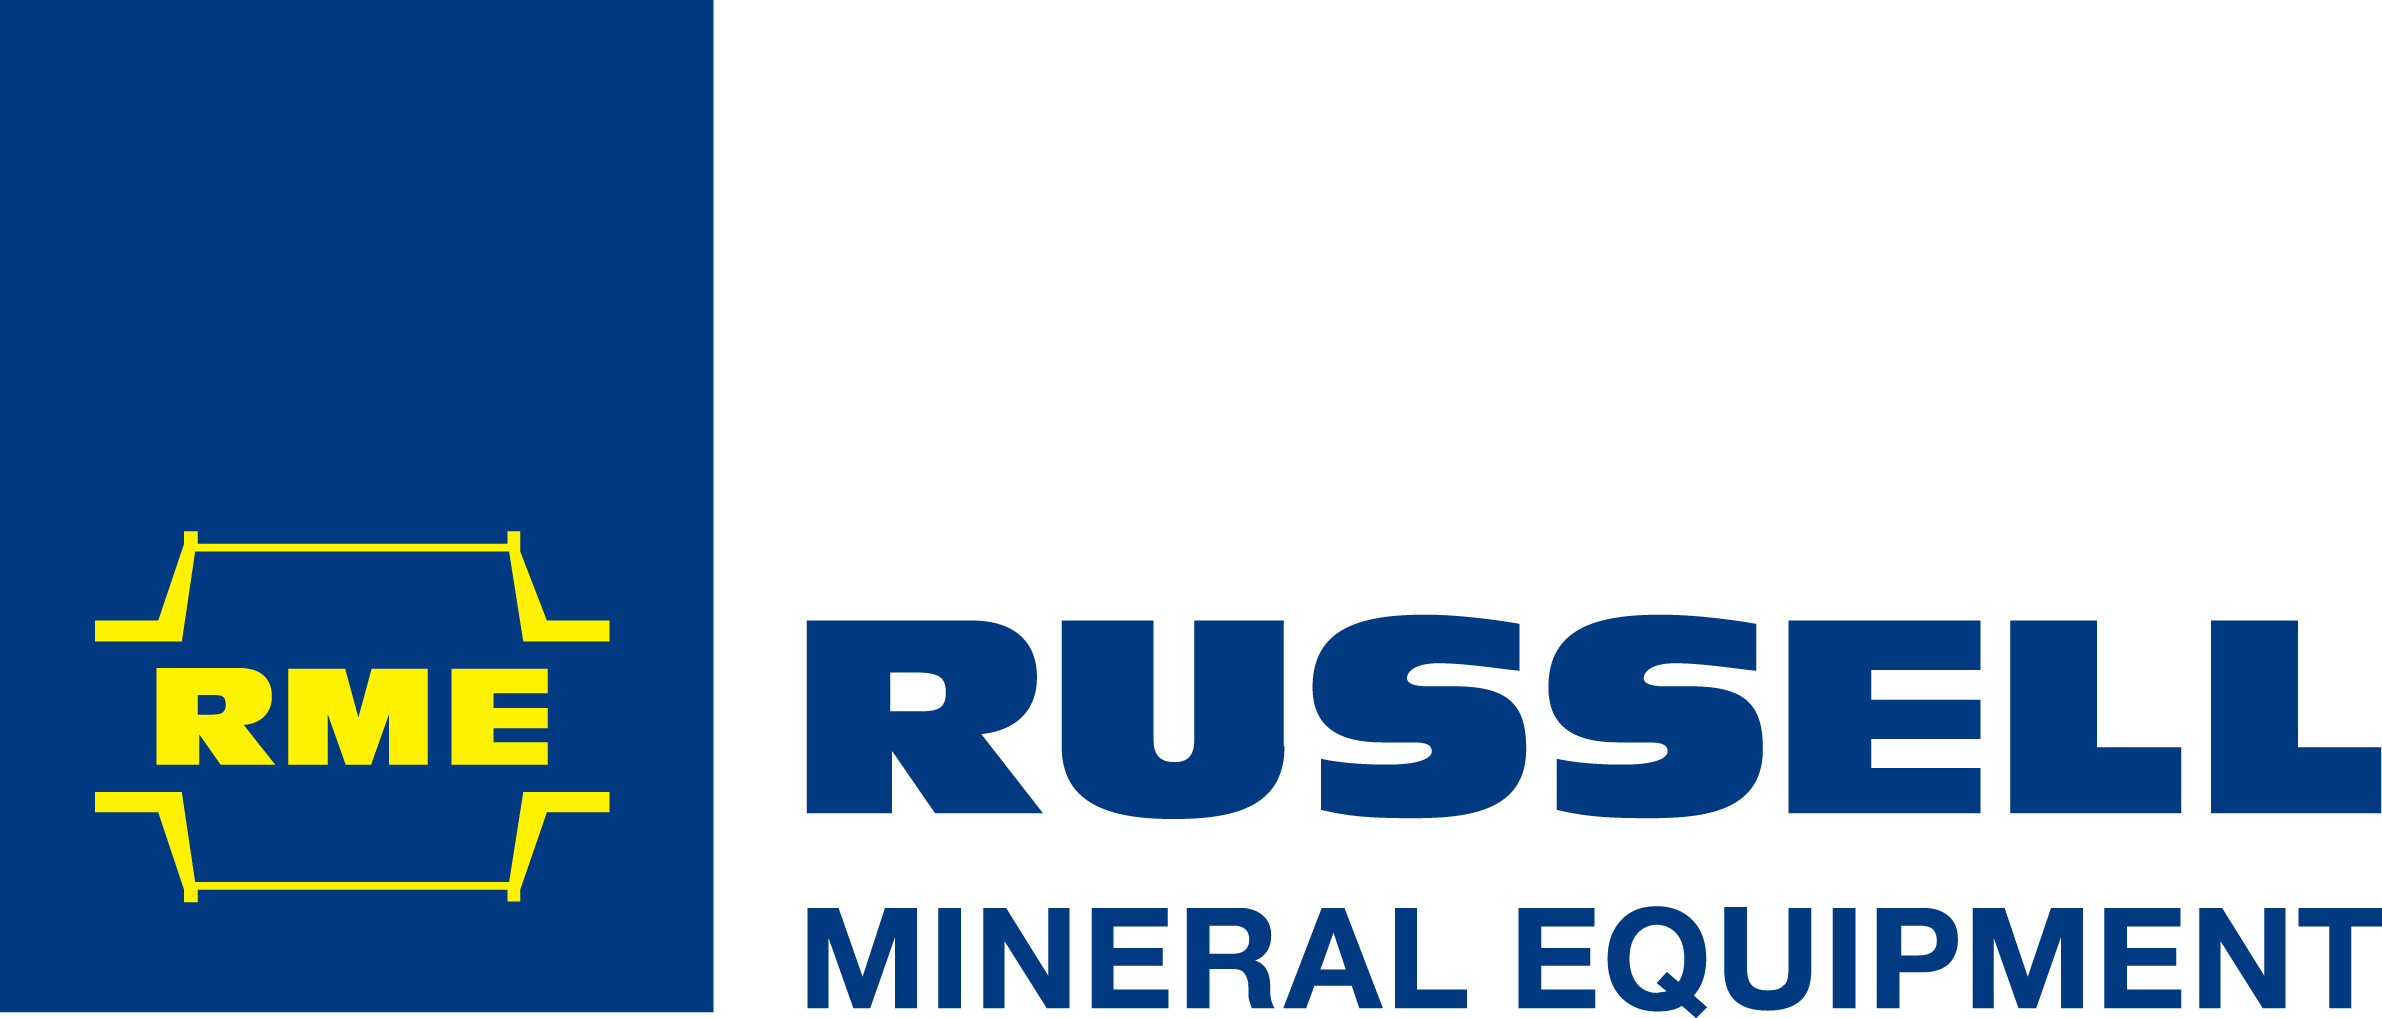 Russell Mineral Equipment logo